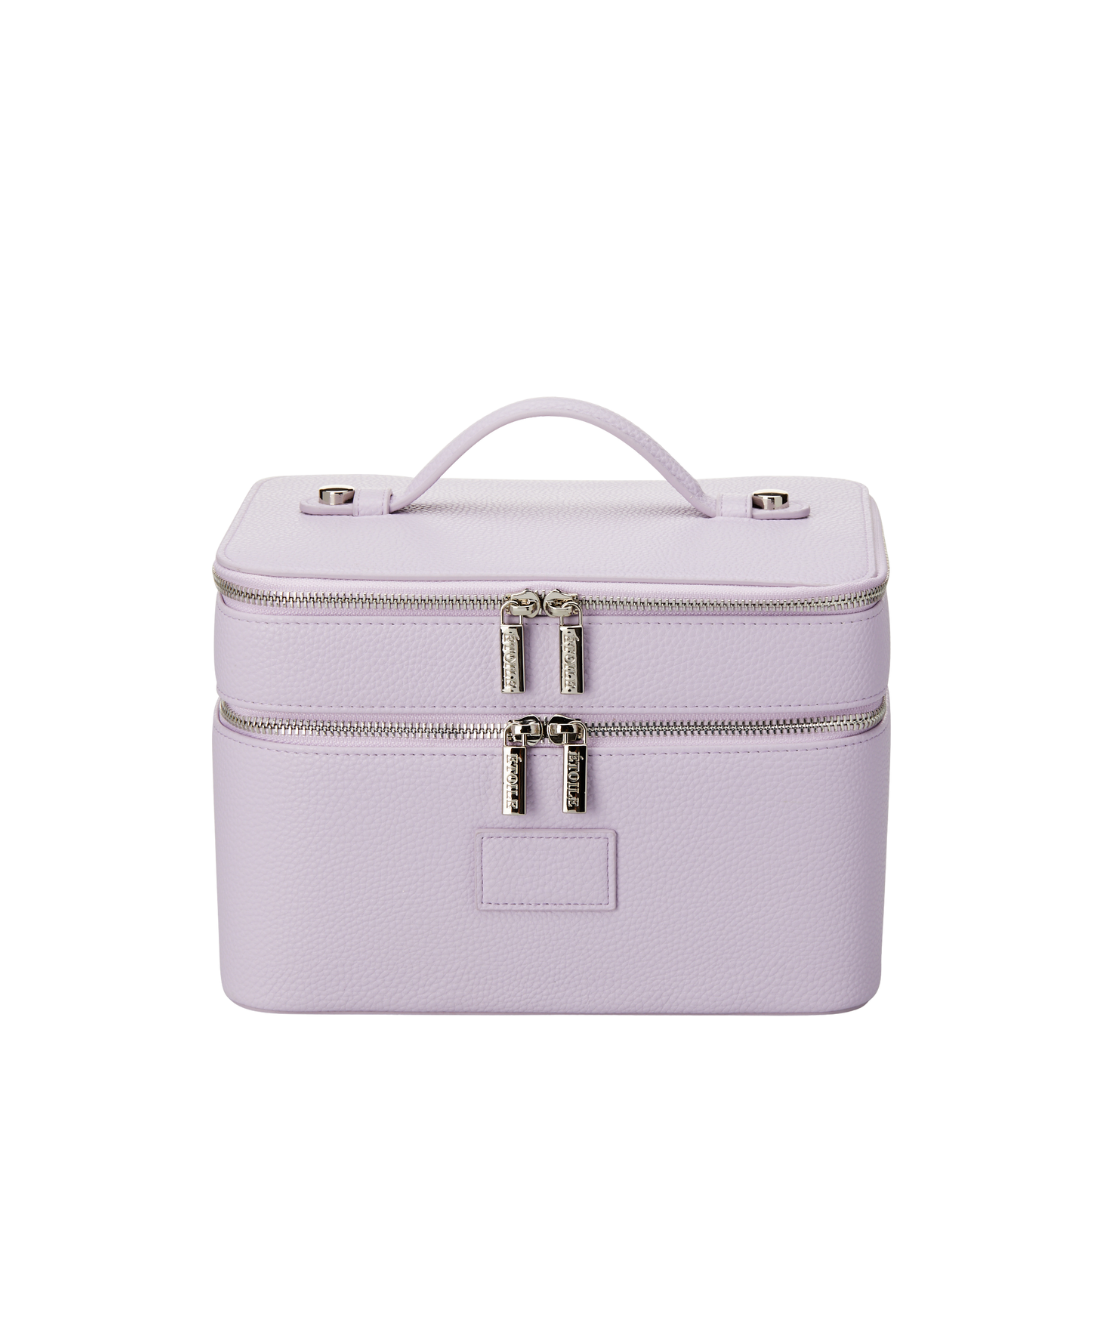 Portable Makeup Box Lock Mermaid Alloy Cosmetic Case with 4 Trays Girl's  Jewelry Nail Hair Accessory Storage Organizer Suitcase